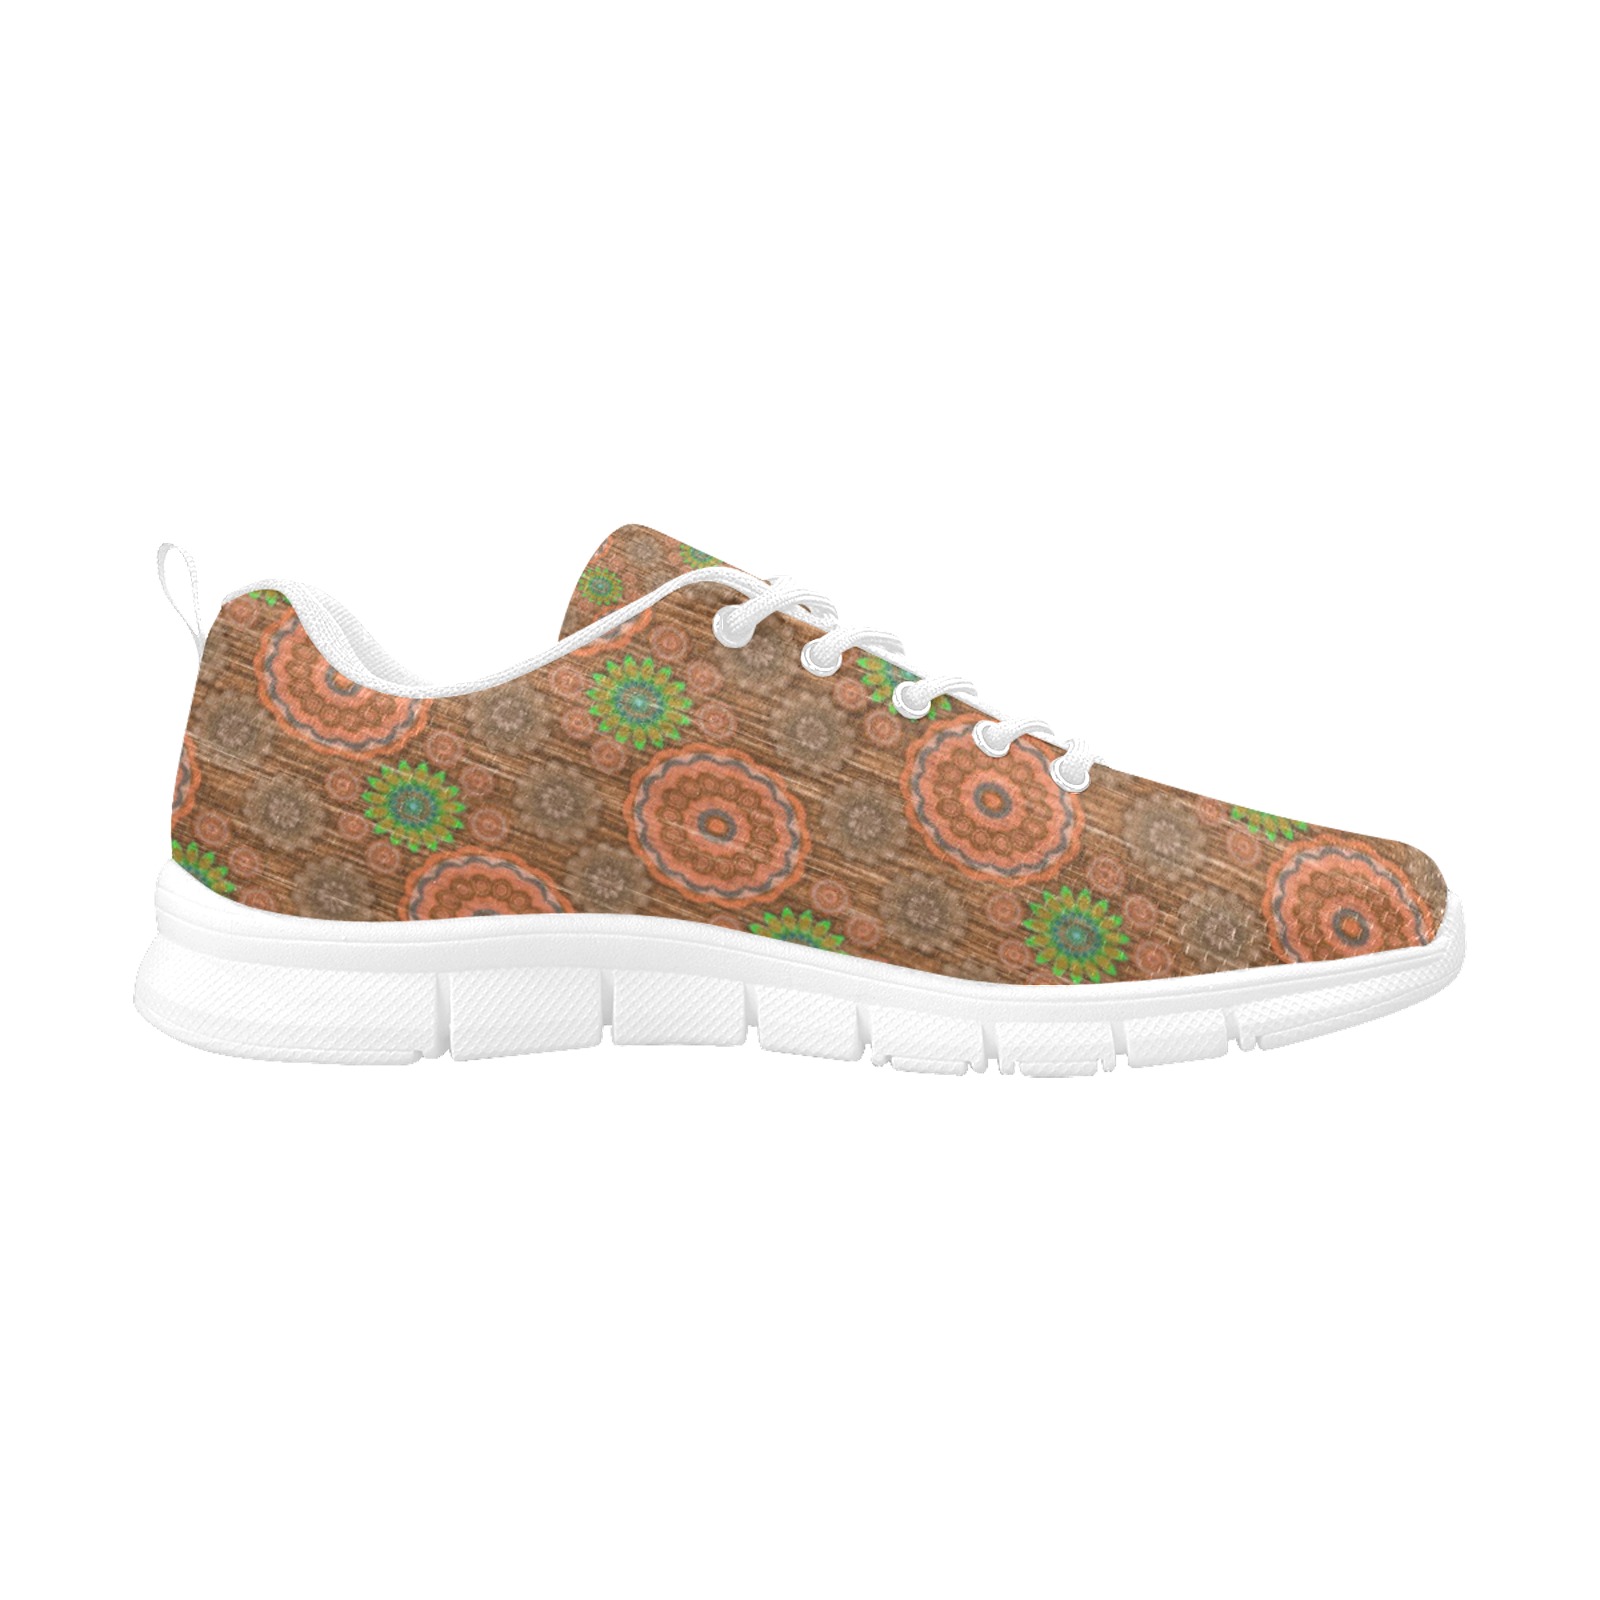 The Orange floral rainy scatter fibers textured Women's Breathable Running Shoes (Model 055)